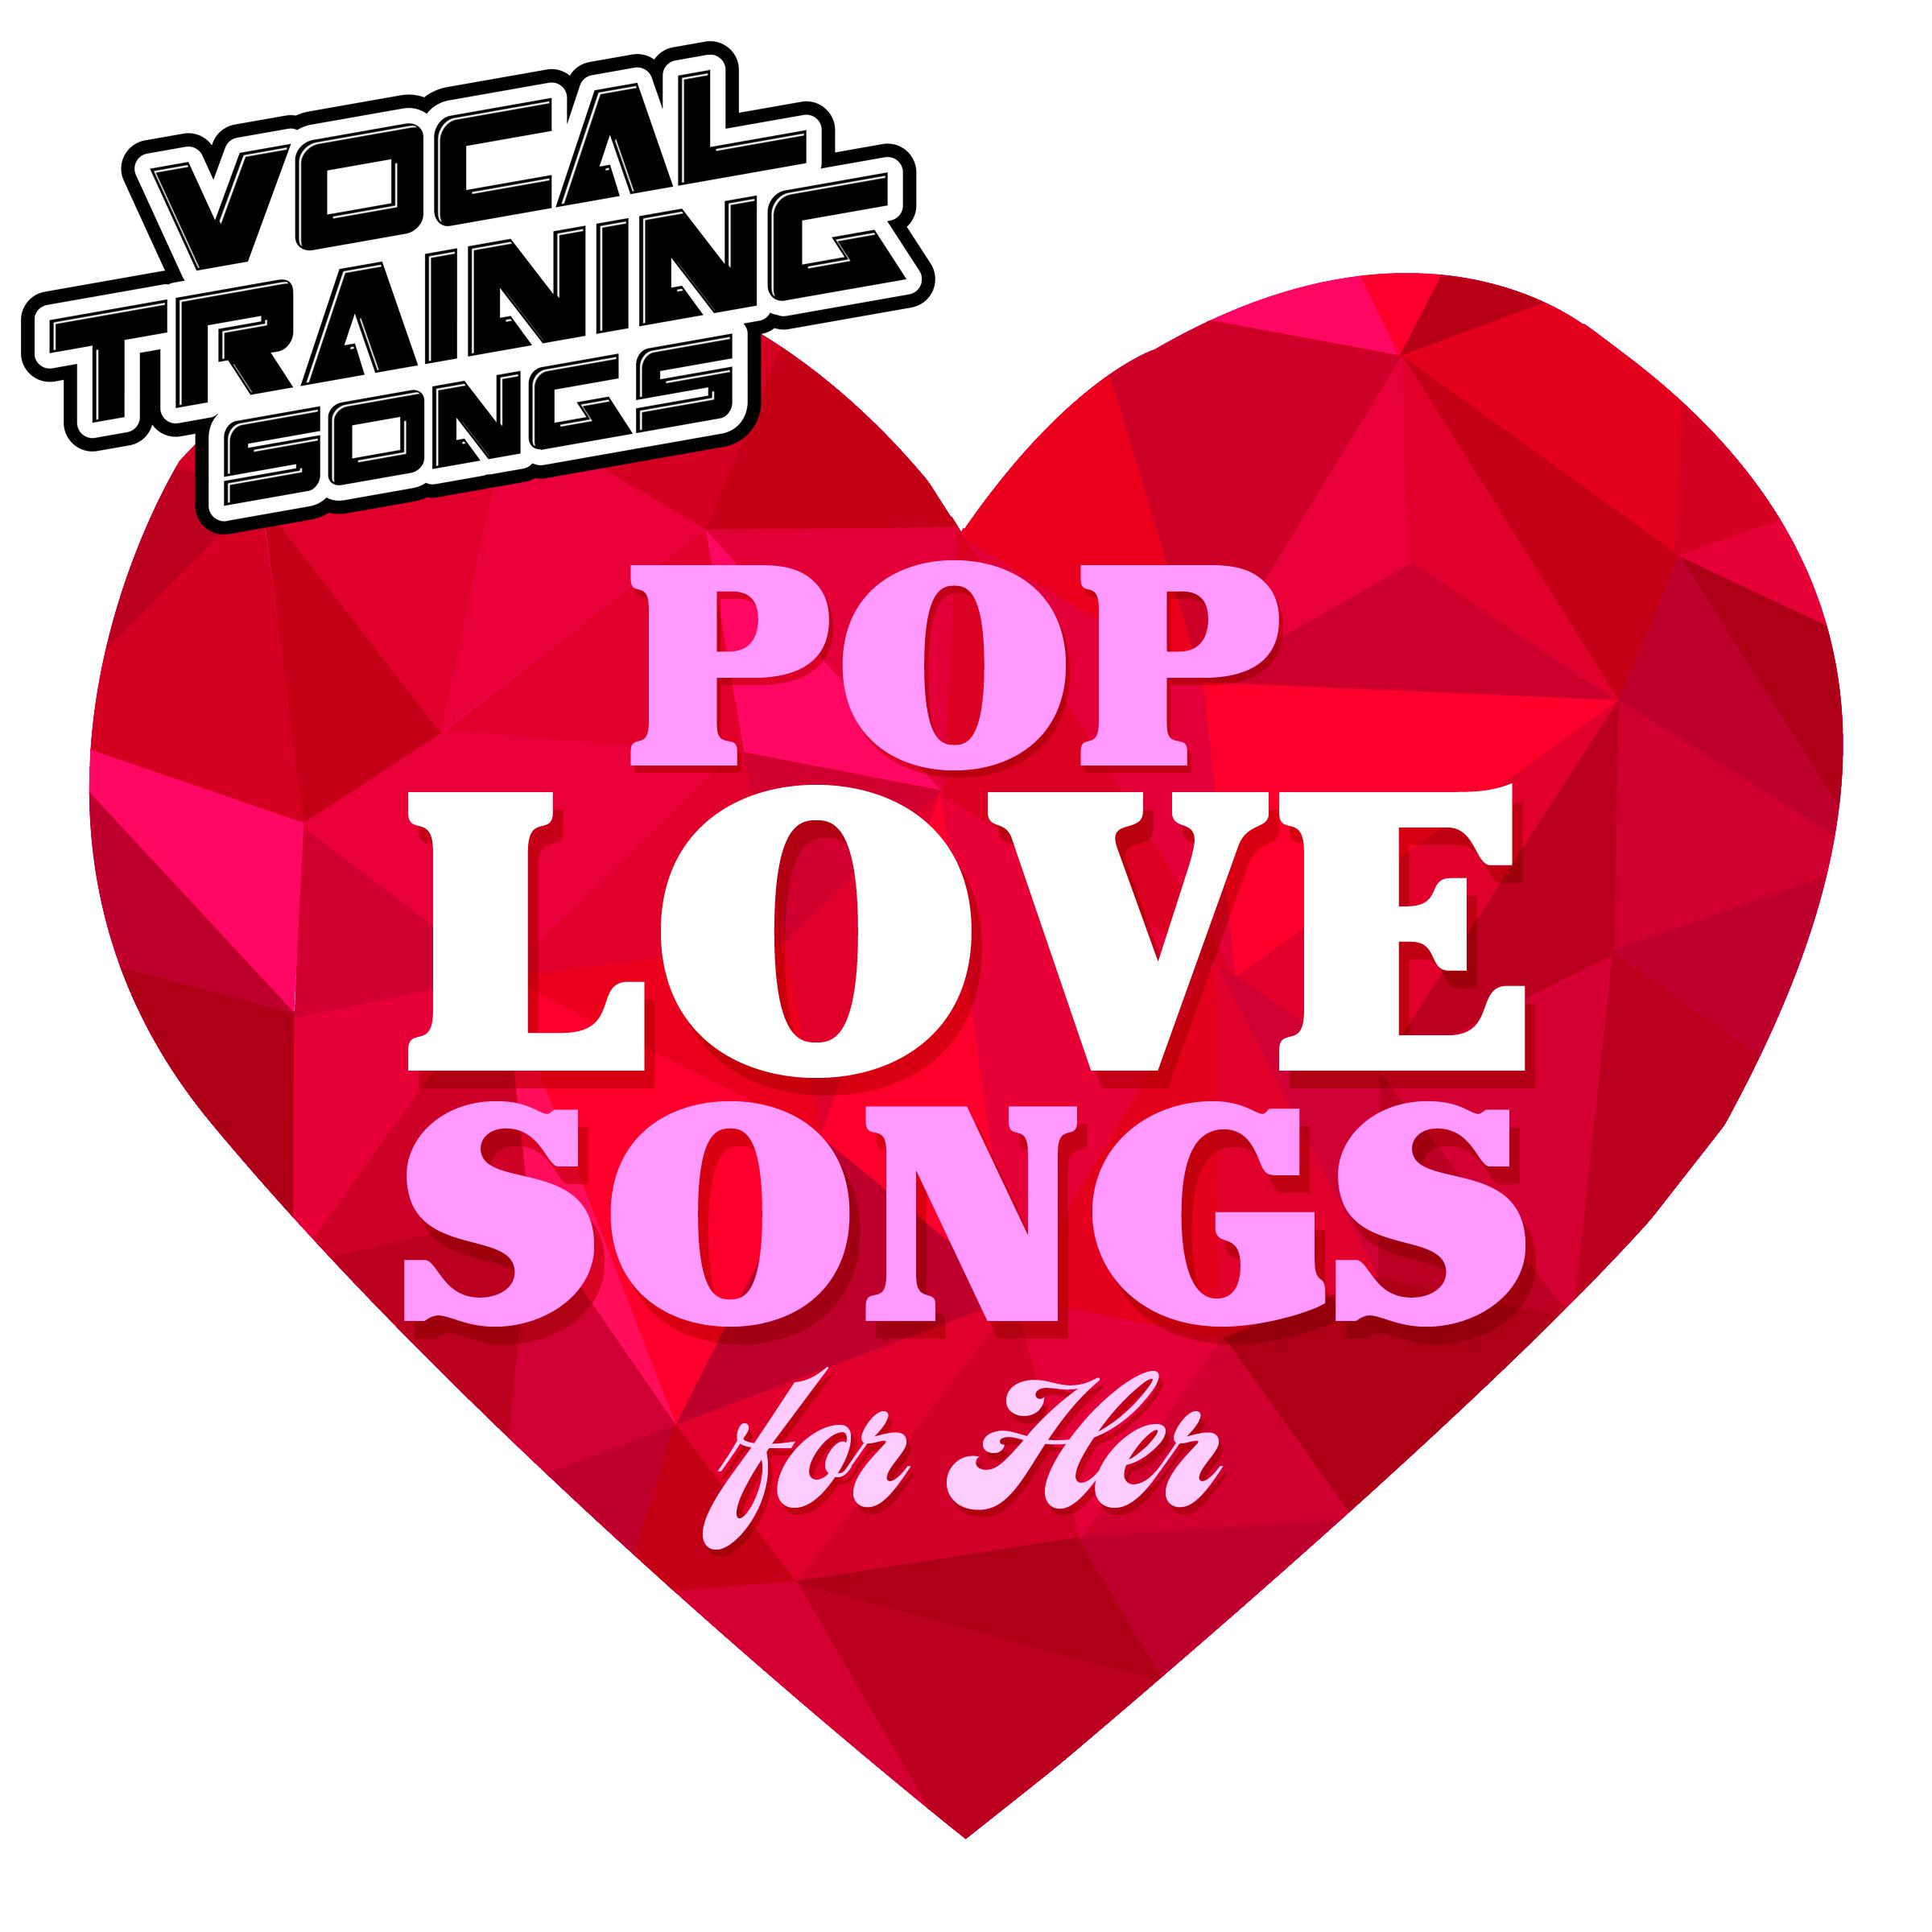 Pop Love Songs for Her - Vocal Training Songs